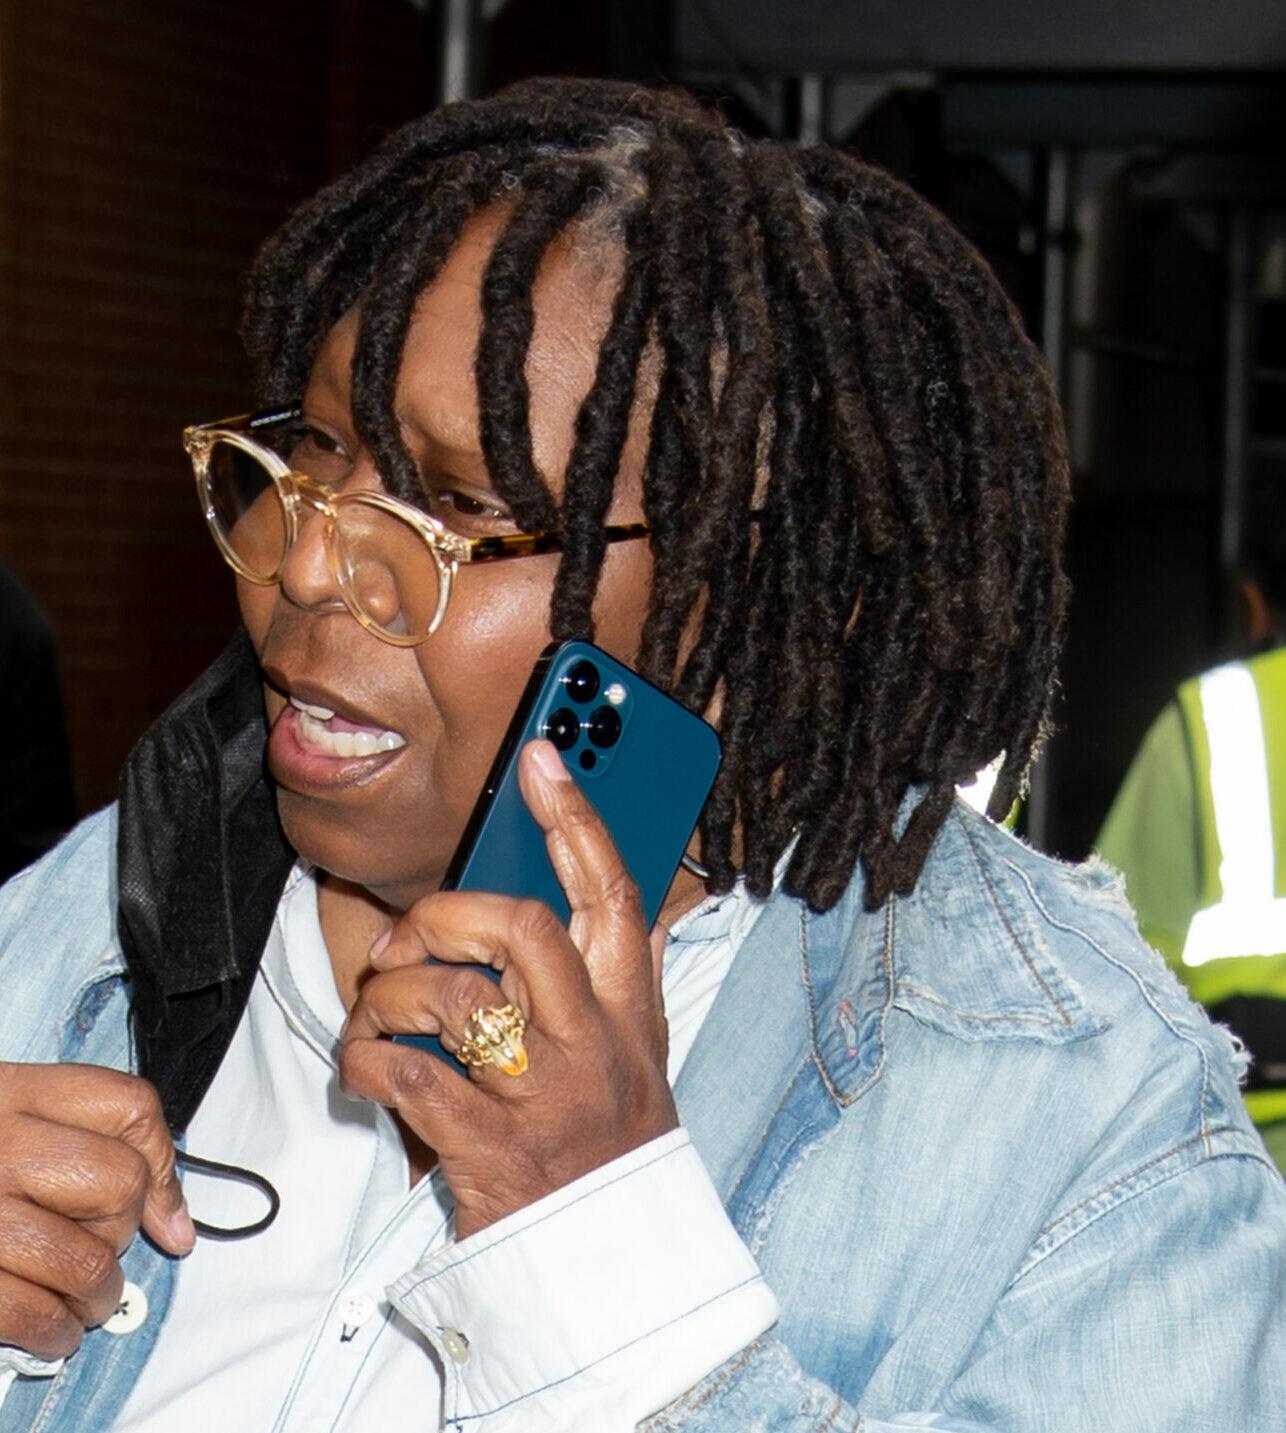 Whoopi Goldberg, Cast of The View seen leaving the studio in NYC